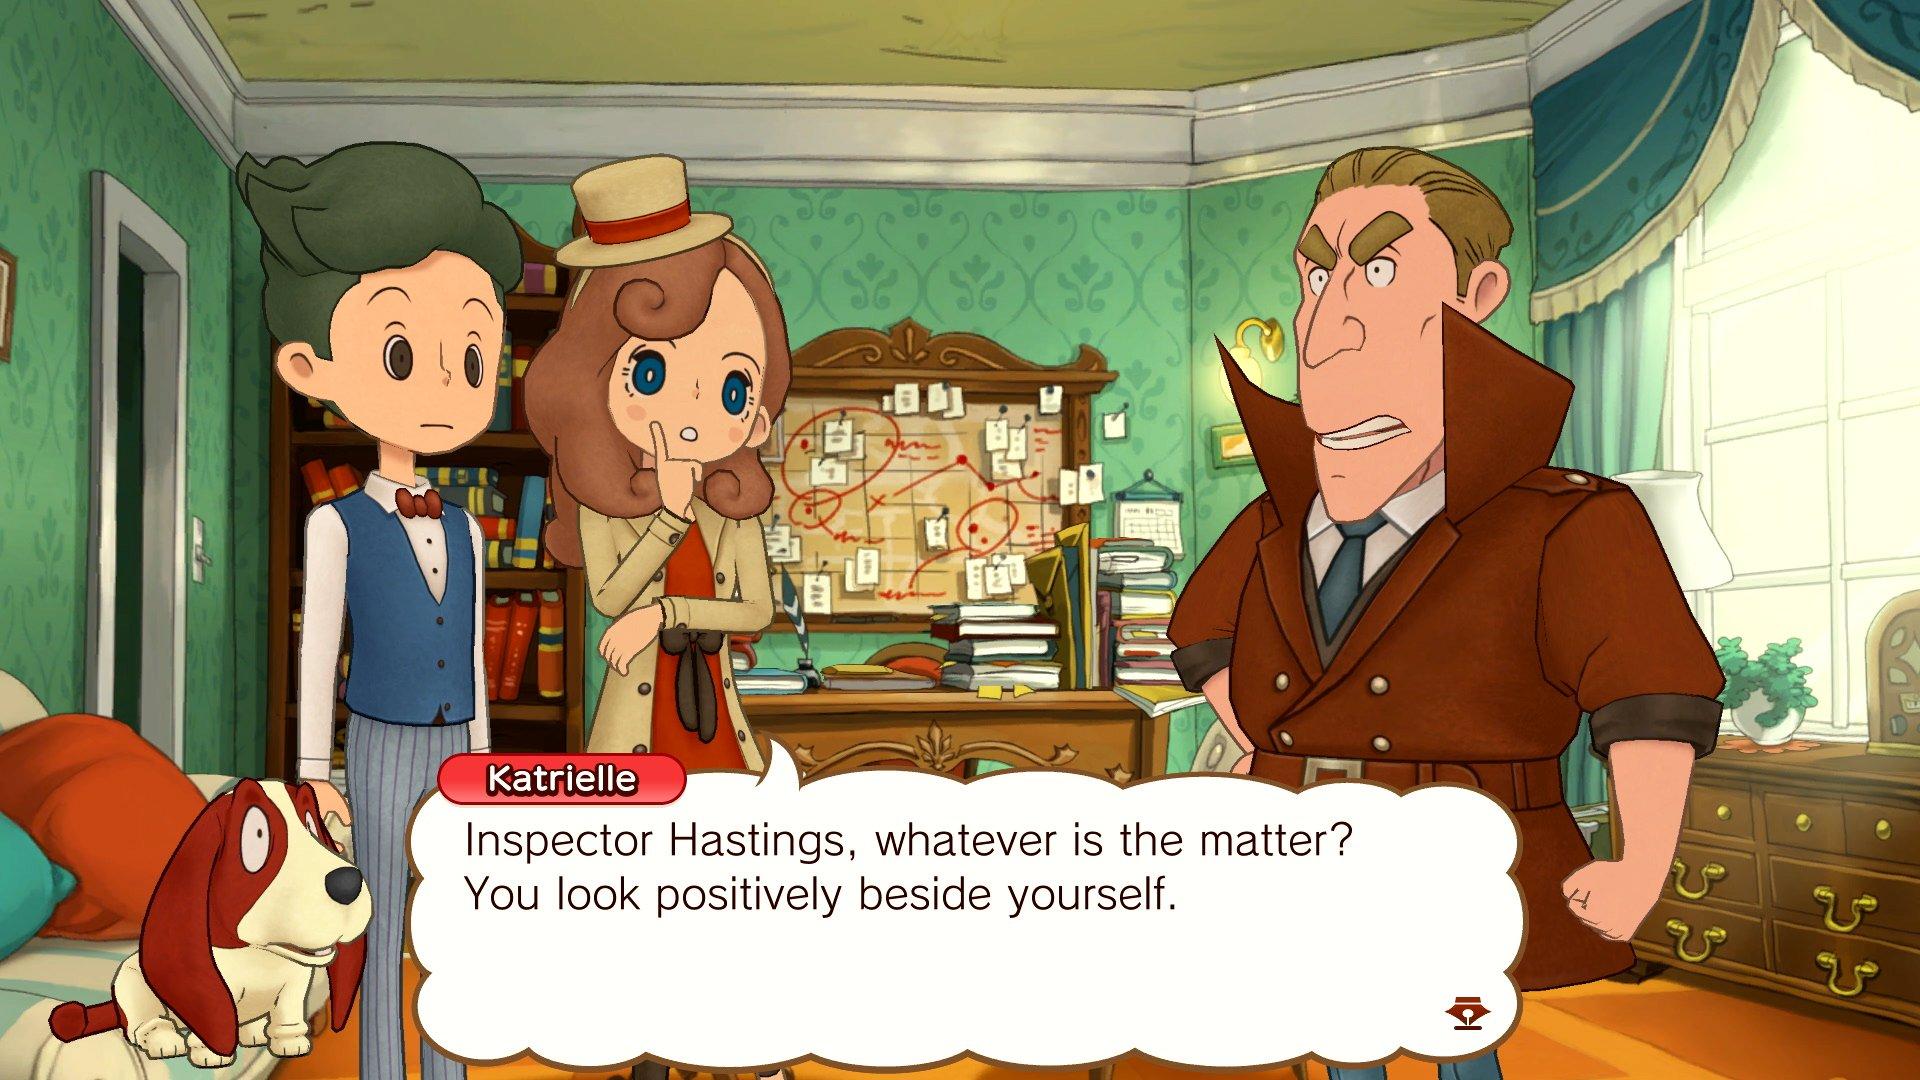 Layton's Mystery Journey - First Hour of Nintendo Switch Gameplay